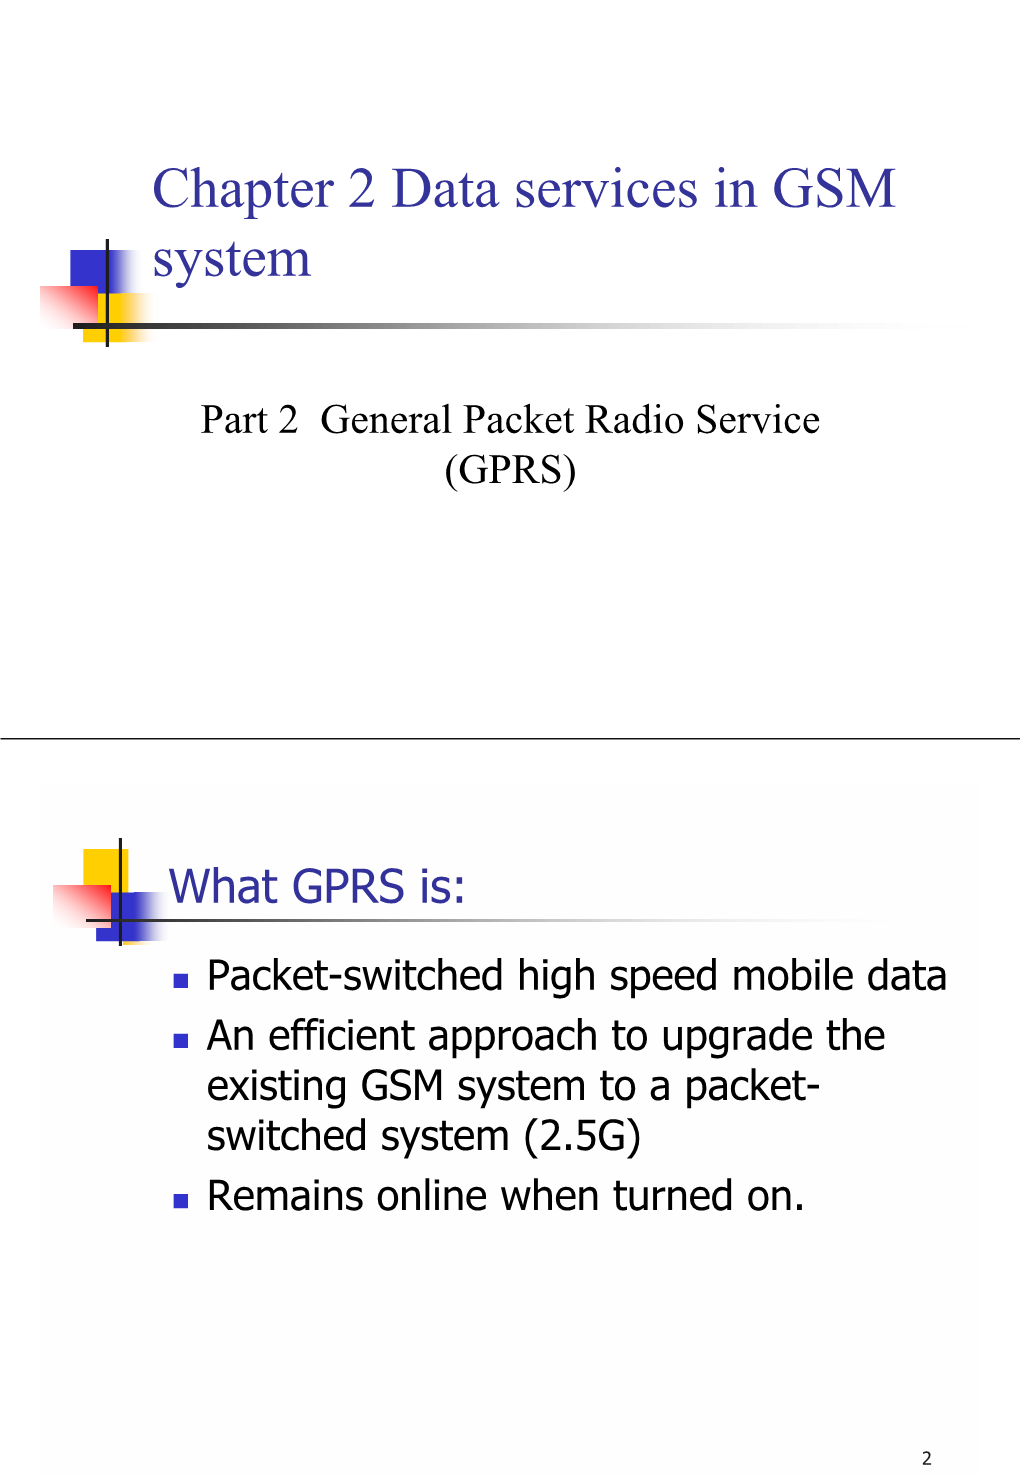 Chapter 2 Data Services in GSM System